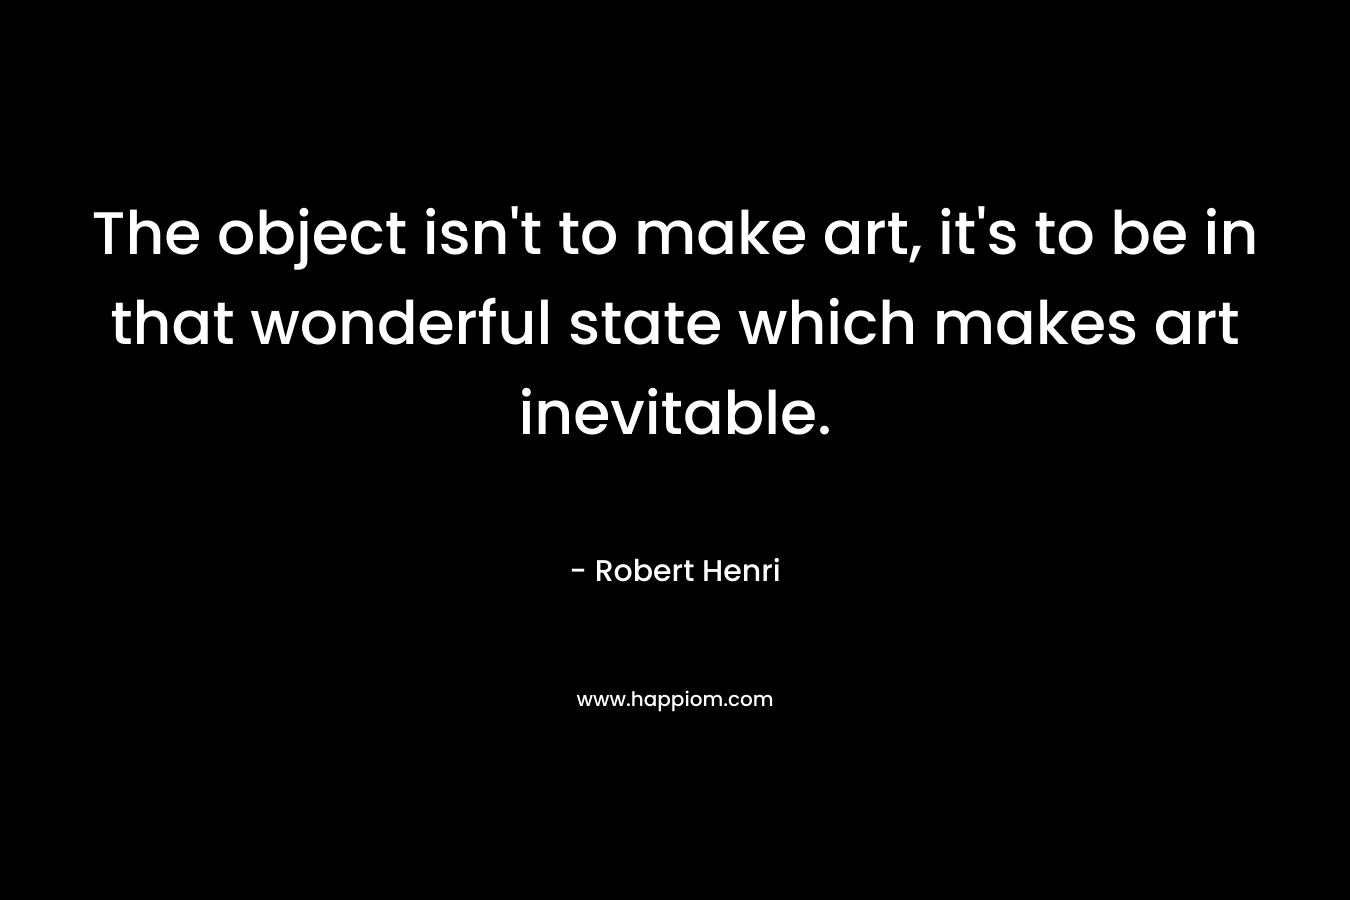 The object isn't to make art, it's to be in that wonderful state which makes art inevitable.